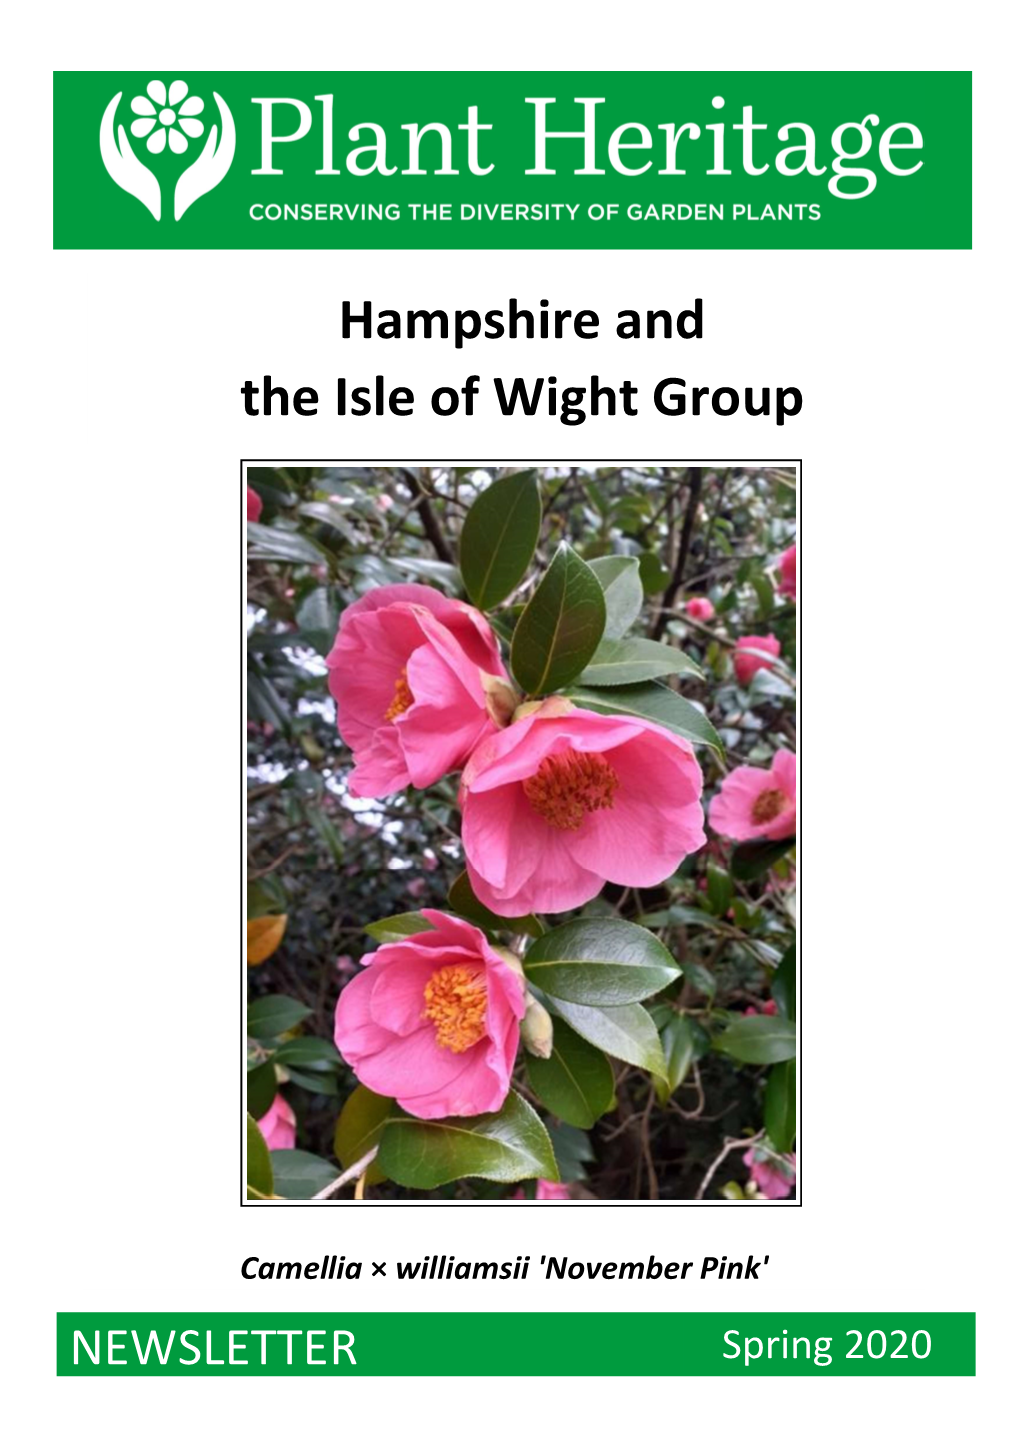 Hampshire and the Isle of Wight Group